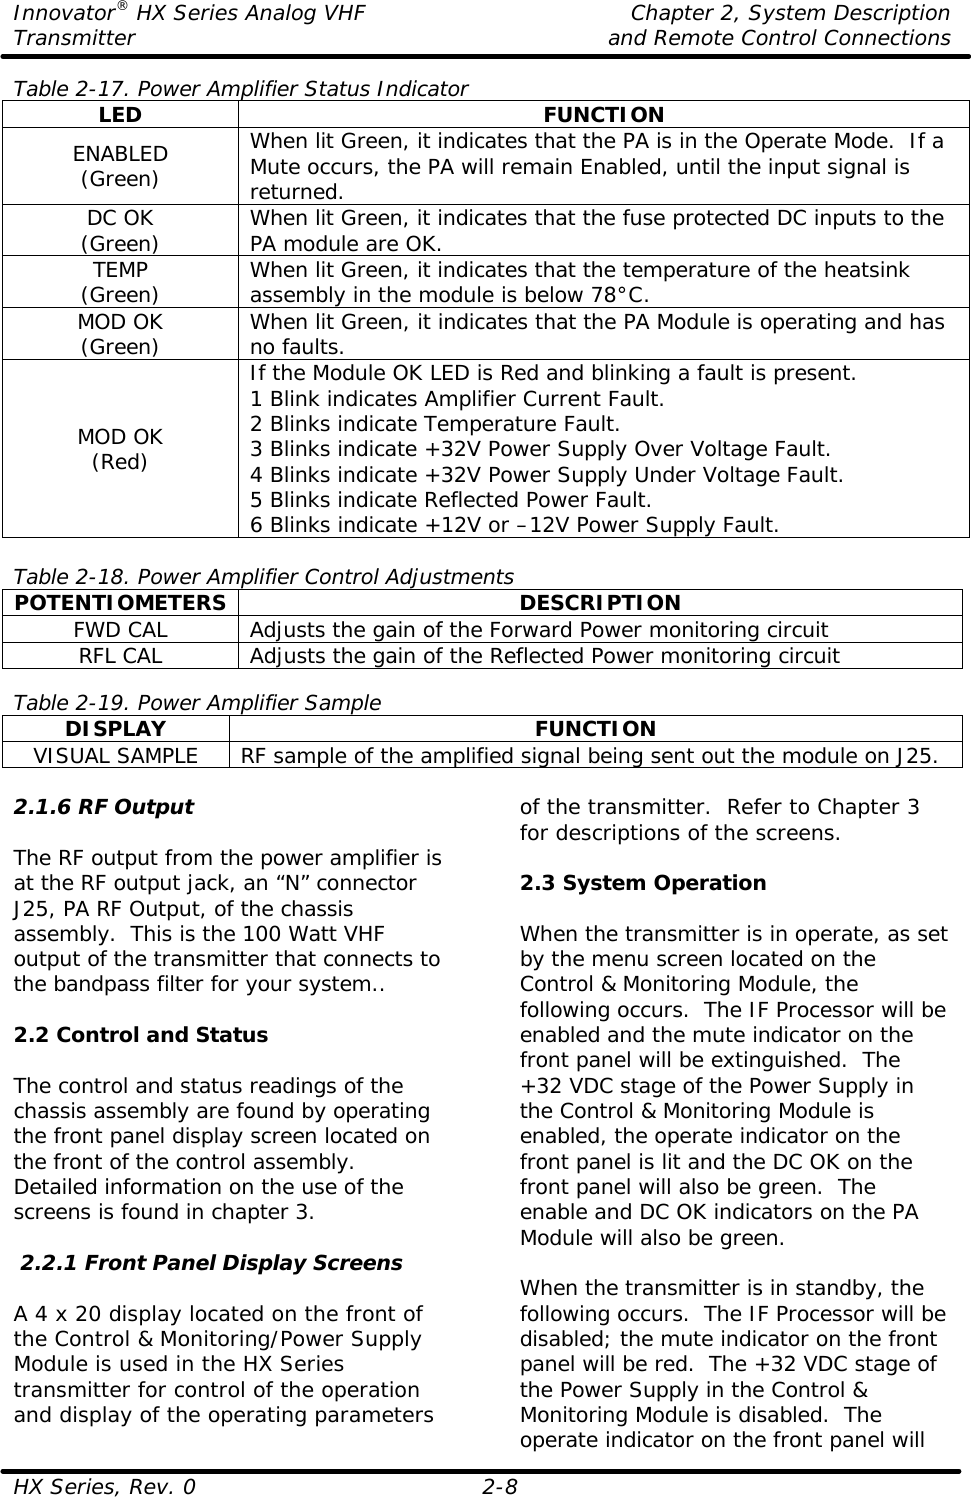 Innovator® HX Series Analog VHF    Chapter 2, System Description Transmitter    and Remote Control Connections  HX Series, Rev. 0 2-8 Table 2-17. Power Amplifier Status Indicator LED FUNCTION ENABLED (Green) When lit Green, it indicates that the PA is in the Operate Mode.  If a Mute occurs, the PA will remain Enabled, until the input signal is returned. DC OK (Green) When lit Green, it indicates that the fuse protected DC inputs to the PA module are OK. TEMP (Green) When lit Green, it indicates that the temperature of the heatsink assembly in the module is below 78°C. MOD OK (Green) When lit Green, it indicates that the PA Module is operating and has no faults. MOD OK (Red) If the Module OK LED is Red and blinking a fault is present. 1 Blink indicates Amplifier Current Fault. 2 Blinks indicate Temperature Fault. 3 Blinks indicate +32V Power Supply Over Voltage Fault. 4 Blinks indicate +32V Power Supply Under Voltage Fault. 5 Blinks indicate Reflected Power Fault. 6 Blinks indicate +12V or –12V Power Supply Fault.  Table 2-18. Power Amplifier Control Adjustments POTENTIOMETERS DESCRIPTION FWD CAL Adjusts the gain of the Forward Power monitoring circuit RFL CAL Adjusts the gain of the Reflected Power monitoring circuit  Table 2-19. Power Amplifier Sample DISPLAY FUNCTION VISUAL SAMPLE RF sample of the amplified signal being sent out the module on J25.  2.1.6 RF Output  The RF output from the power amplifier is at the RF output jack, an “N” connector J25, PA RF Output, of the chassis assembly.  This is the 100 Watt VHF output of the transmitter that connects to the bandpass filter for your system..  2.2 Control and Status  The control and status readings of the chassis assembly are found by operating the front panel display screen located on the front of the control assembly.  Detailed information on the use of the screens is found in chapter 3.   2.2.1 Front Panel Display Screens  A 4 x 20 display located on the front of the Control &amp; Monitoring/Power Supply Module is used in the HX Series transmitter for control of the operation and display of the operating parameters of the transmitter.  Refer to Chapter 3 for descriptions of the screens.  2.3 System Operation  When the transmitter is in operate, as set by the menu screen located on the Control &amp; Monitoring Module, the following occurs.  The IF Processor will be enabled and the mute indicator on the front panel will be extinguished.  The +32 VDC stage of the Power Supply in the Control &amp; Monitoring Module is enabled, the operate indicator on the front panel is lit and the DC OK on the front panel will also be green.  The enable and DC OK indicators on the PA Module will also be green.  When the transmitter is in standby, the following occurs.  The IF Processor will be disabled; the mute indicator on the front panel will be red.  The +32 VDC stage of the Power Supply in the Control &amp; Monitoring Module is disabled.  The operate indicator on the front panel will 